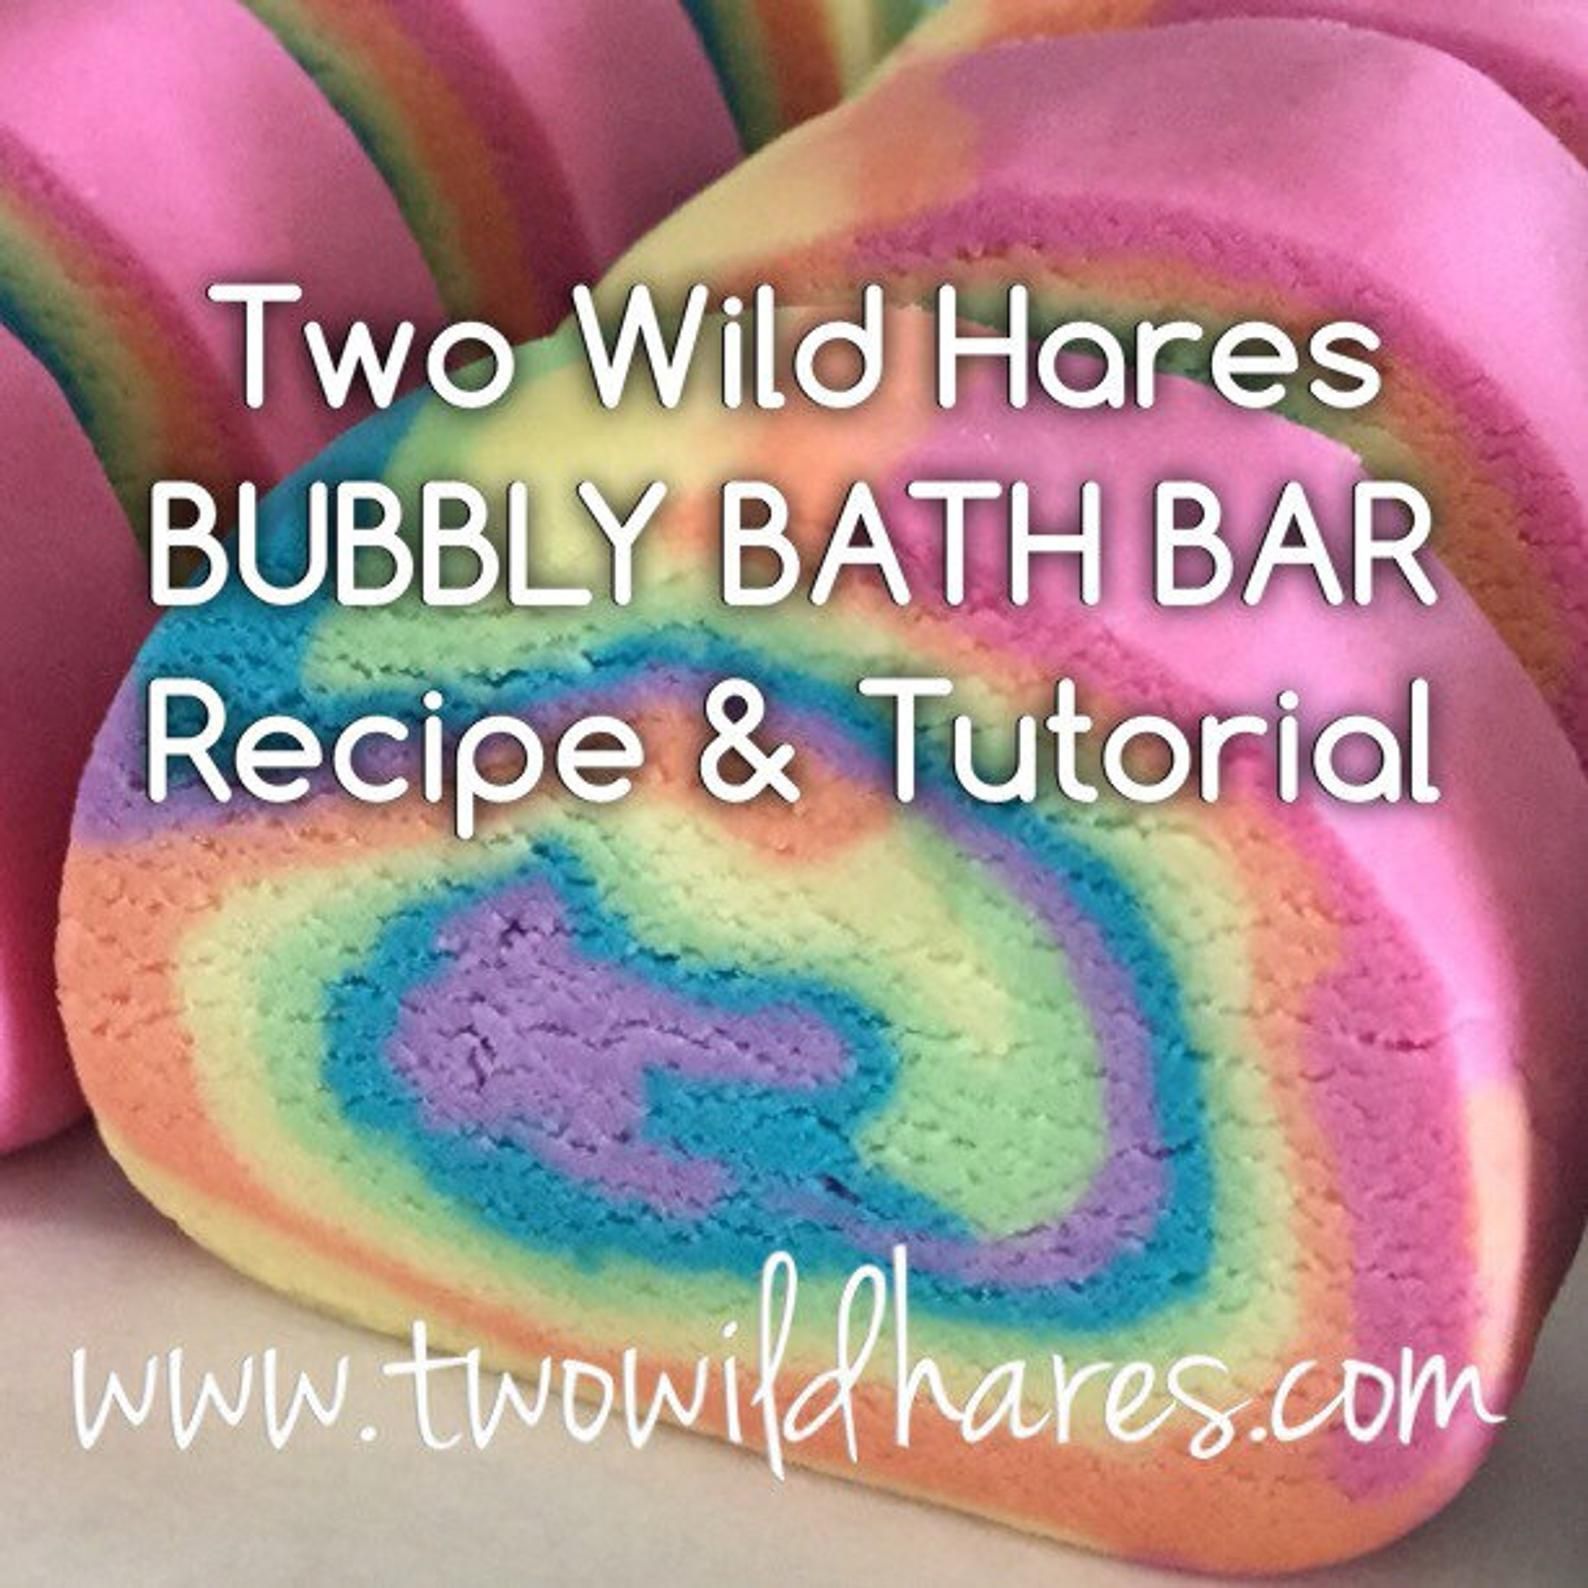 DIY Bubbly Bath Bar / Solid Bubble Bath Recipe Tutorial- FOOLPROOF! Step By Step, Two Wild Hares - DIY Bubbly Bath Bar / Solid Bubble Bath Recipe Tutorial- FOOLPROOF! Step By Step, Two Wild Hares -   17 diy Food step by step ideas